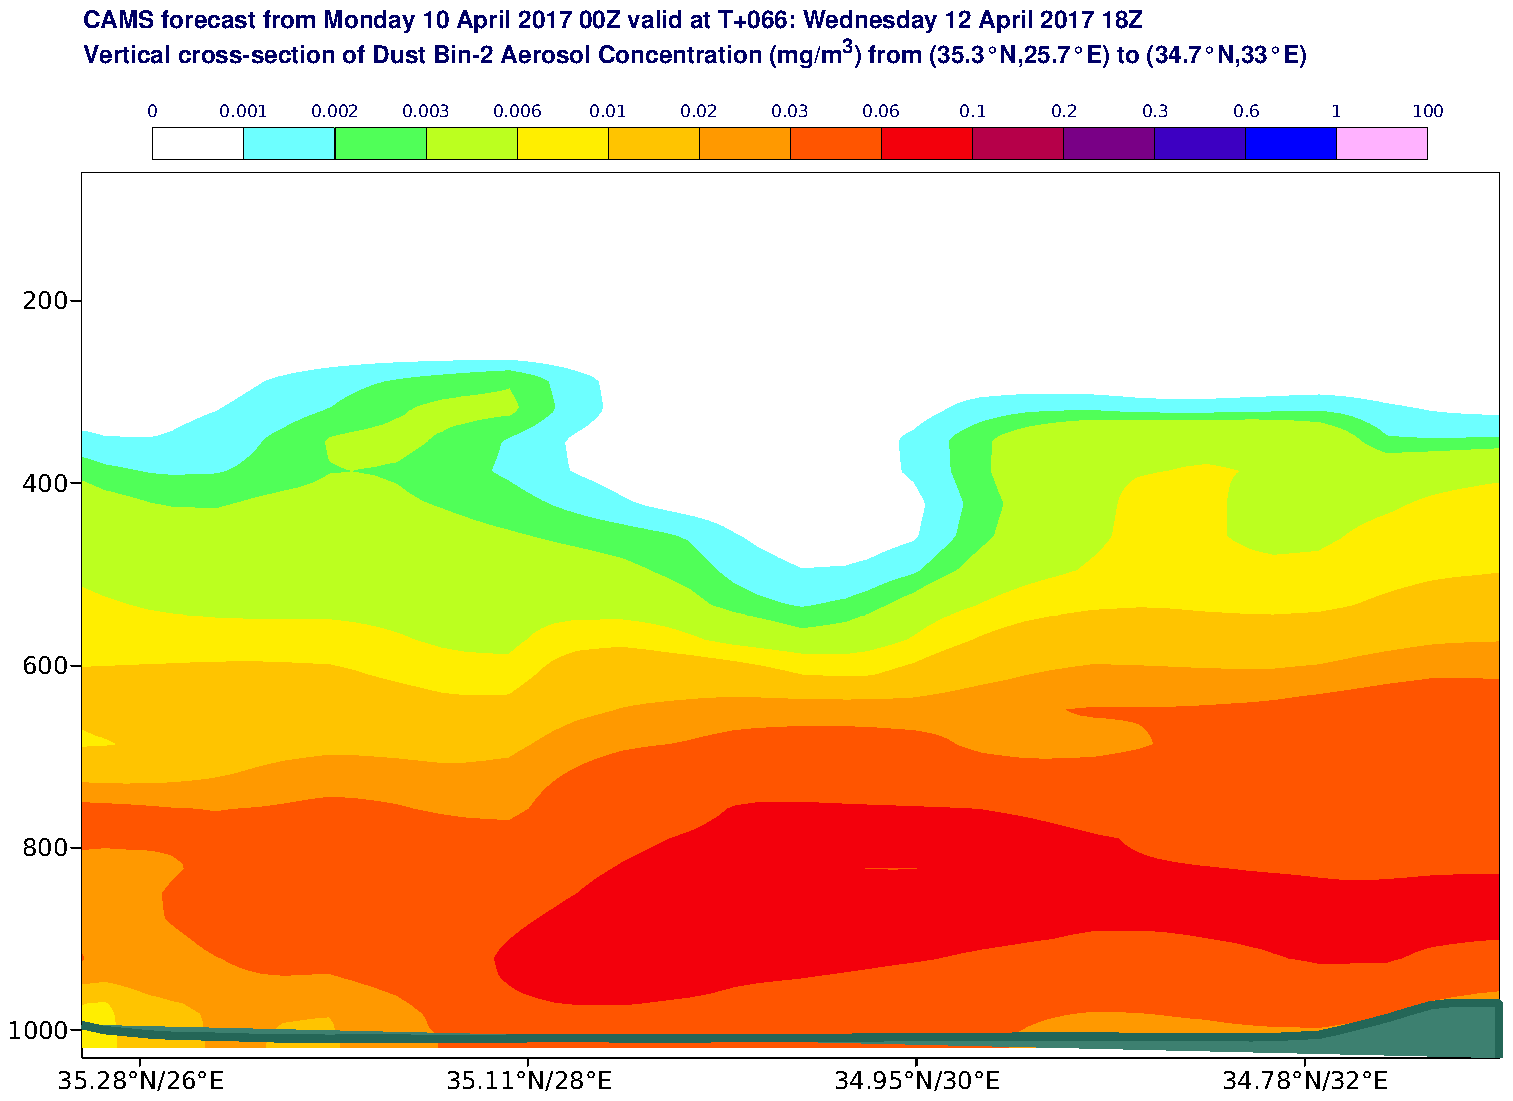 Vertical cross-section of Dust Bin-2 Aerosol Concentration (mg/m3) valid at T66 - 2017-04-12 18:00